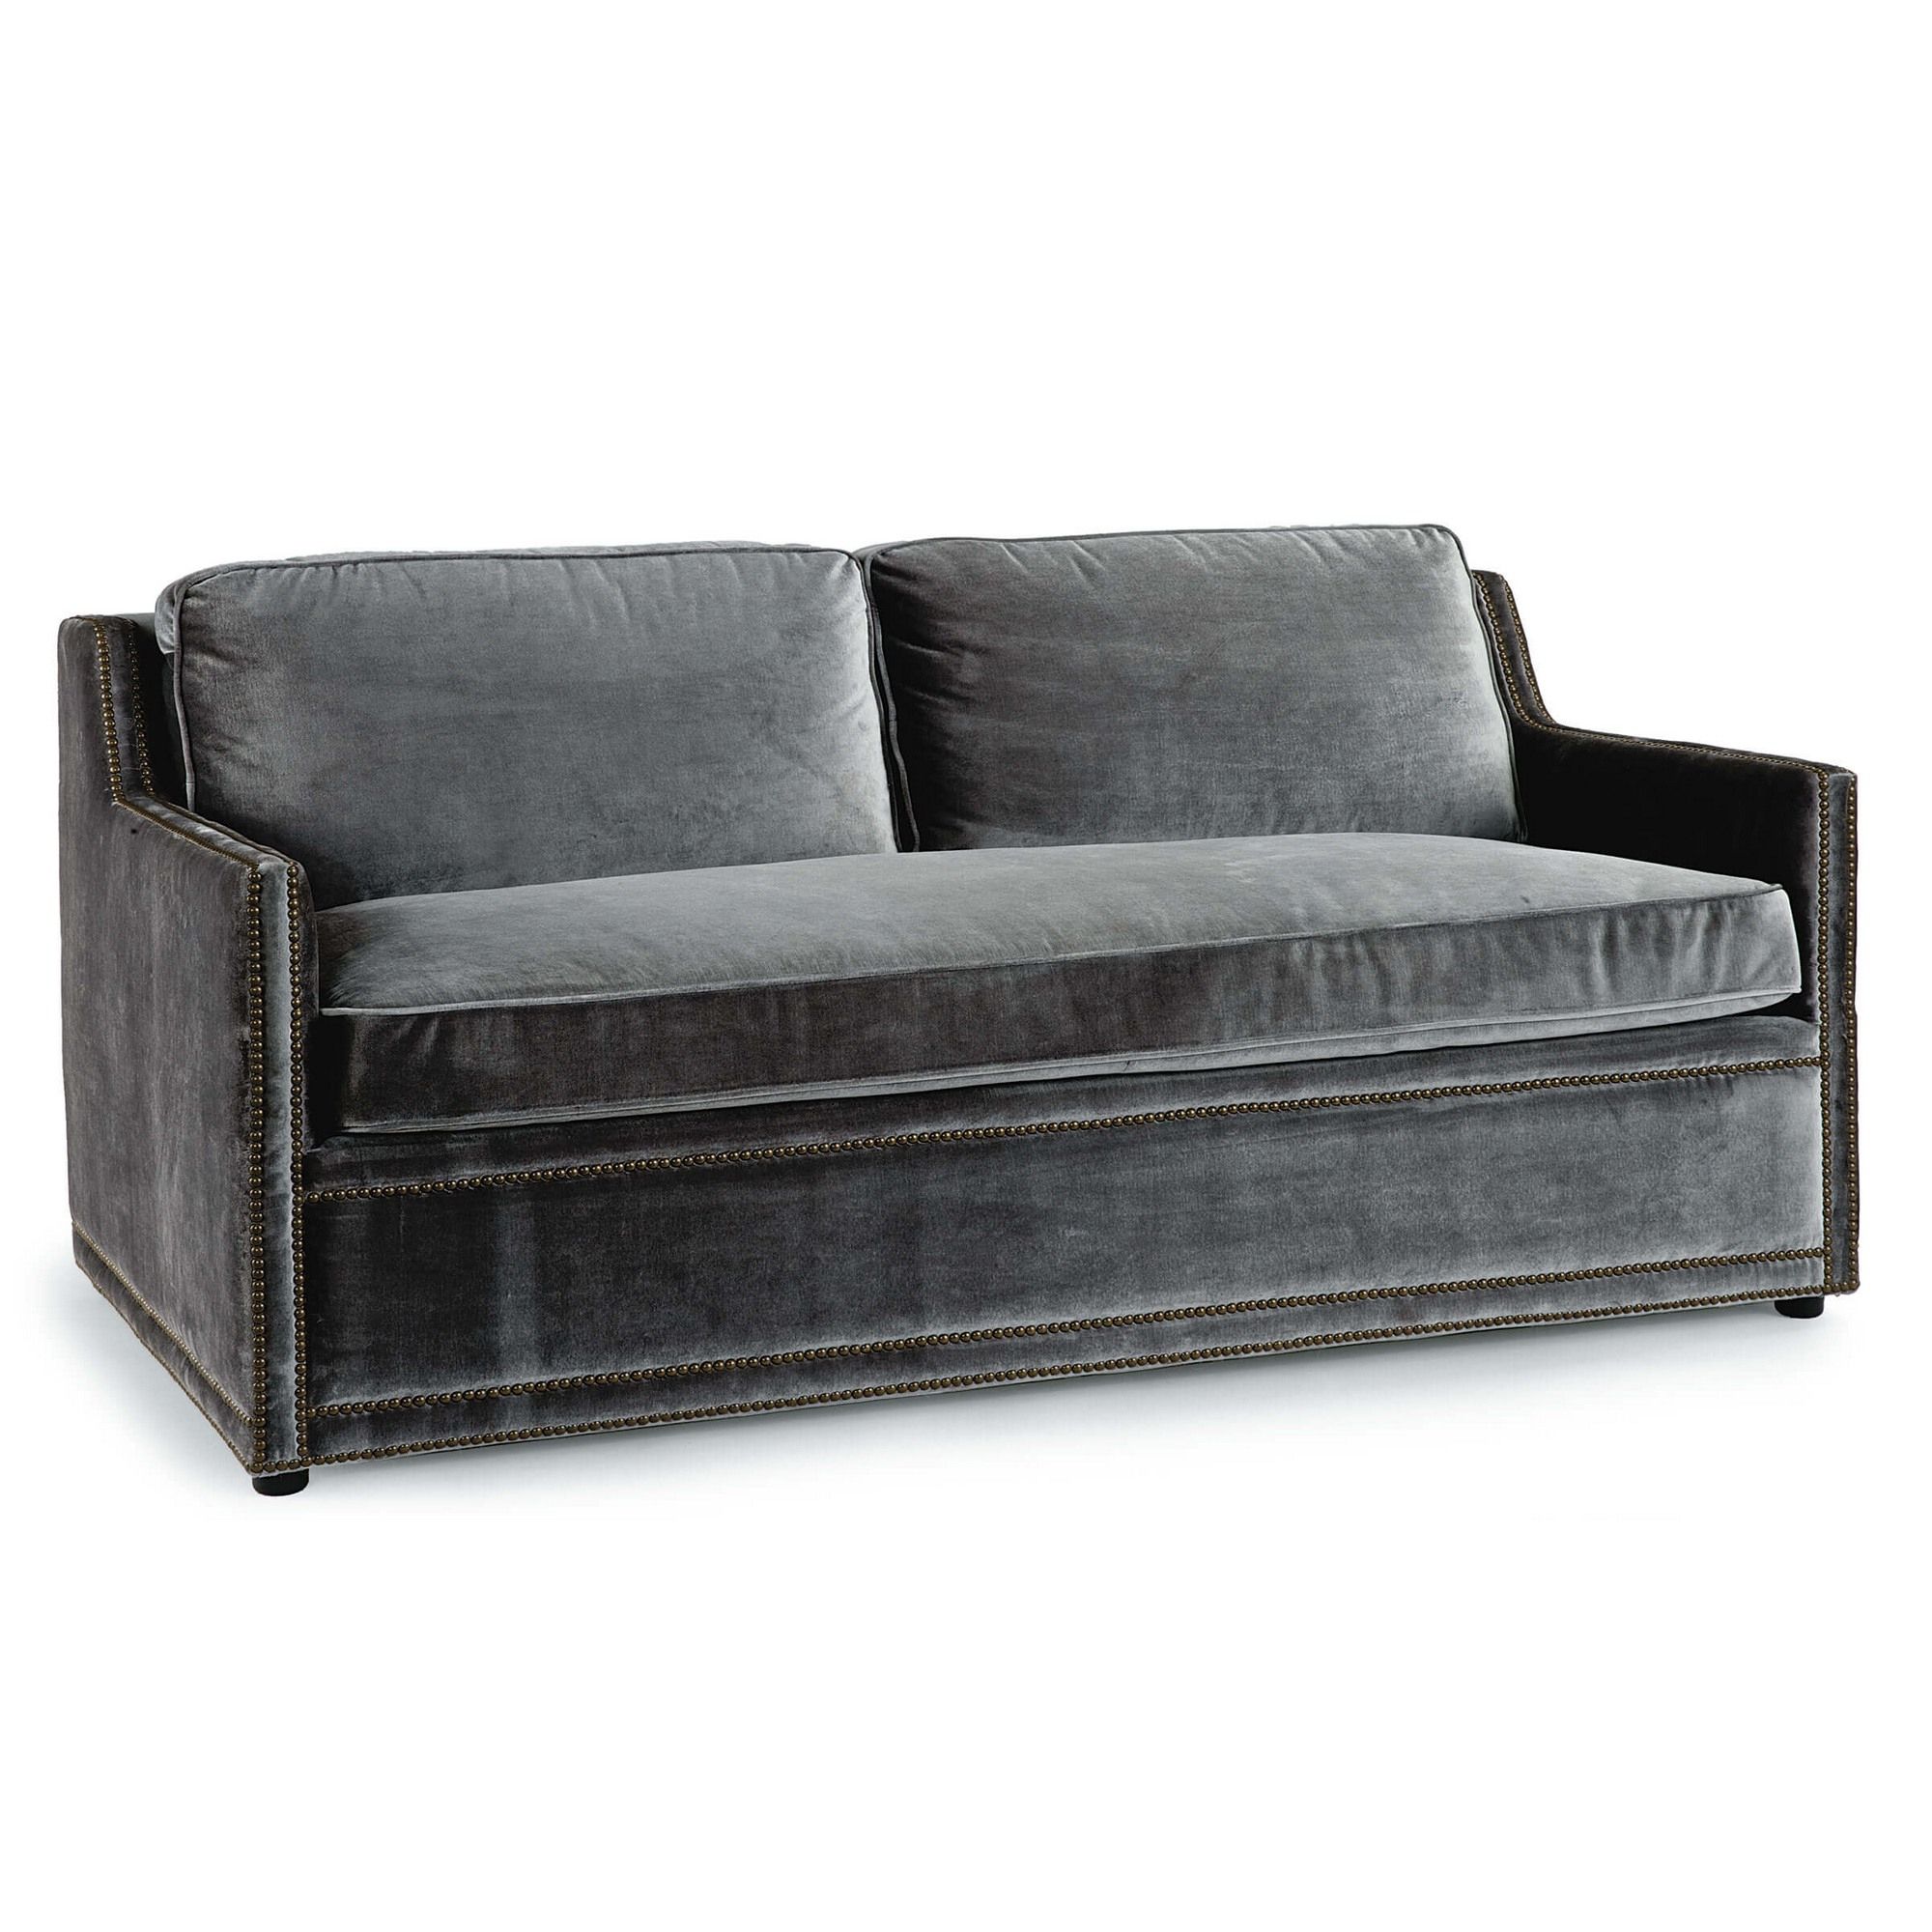 Posh Sofa (Charcoal Grey) In Charcoal Grey Sofas (View 10 of 15)